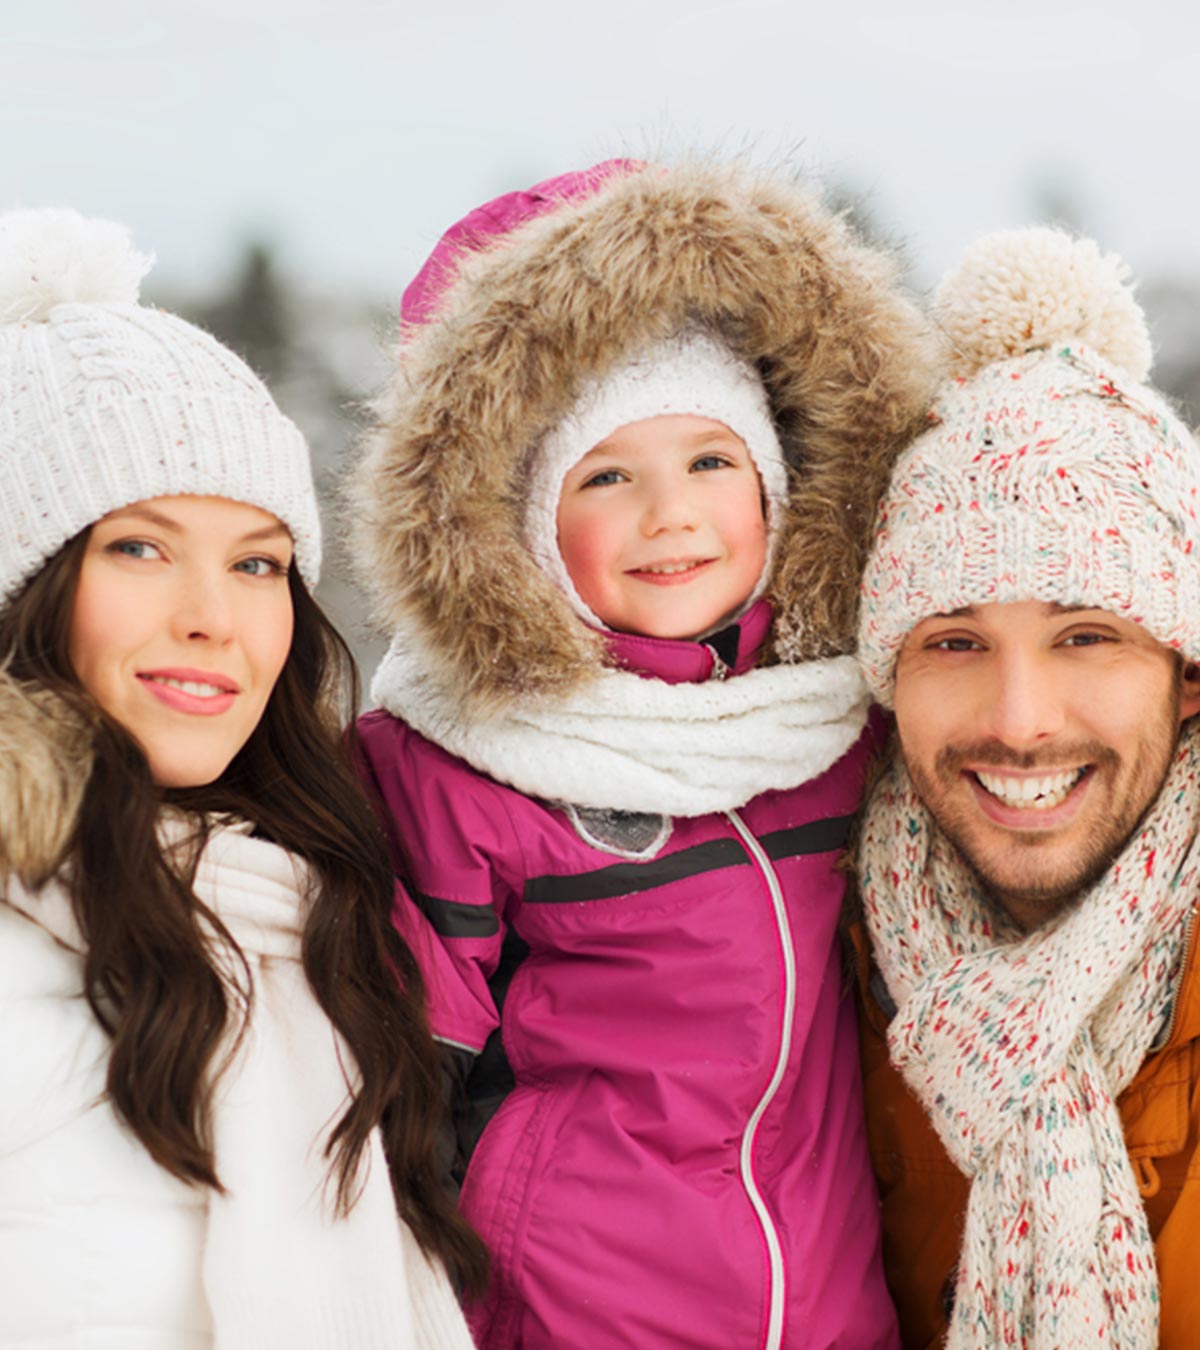 Winter Care: 7 Tips To Keep Your Kids Safe, Warm, And Healthy